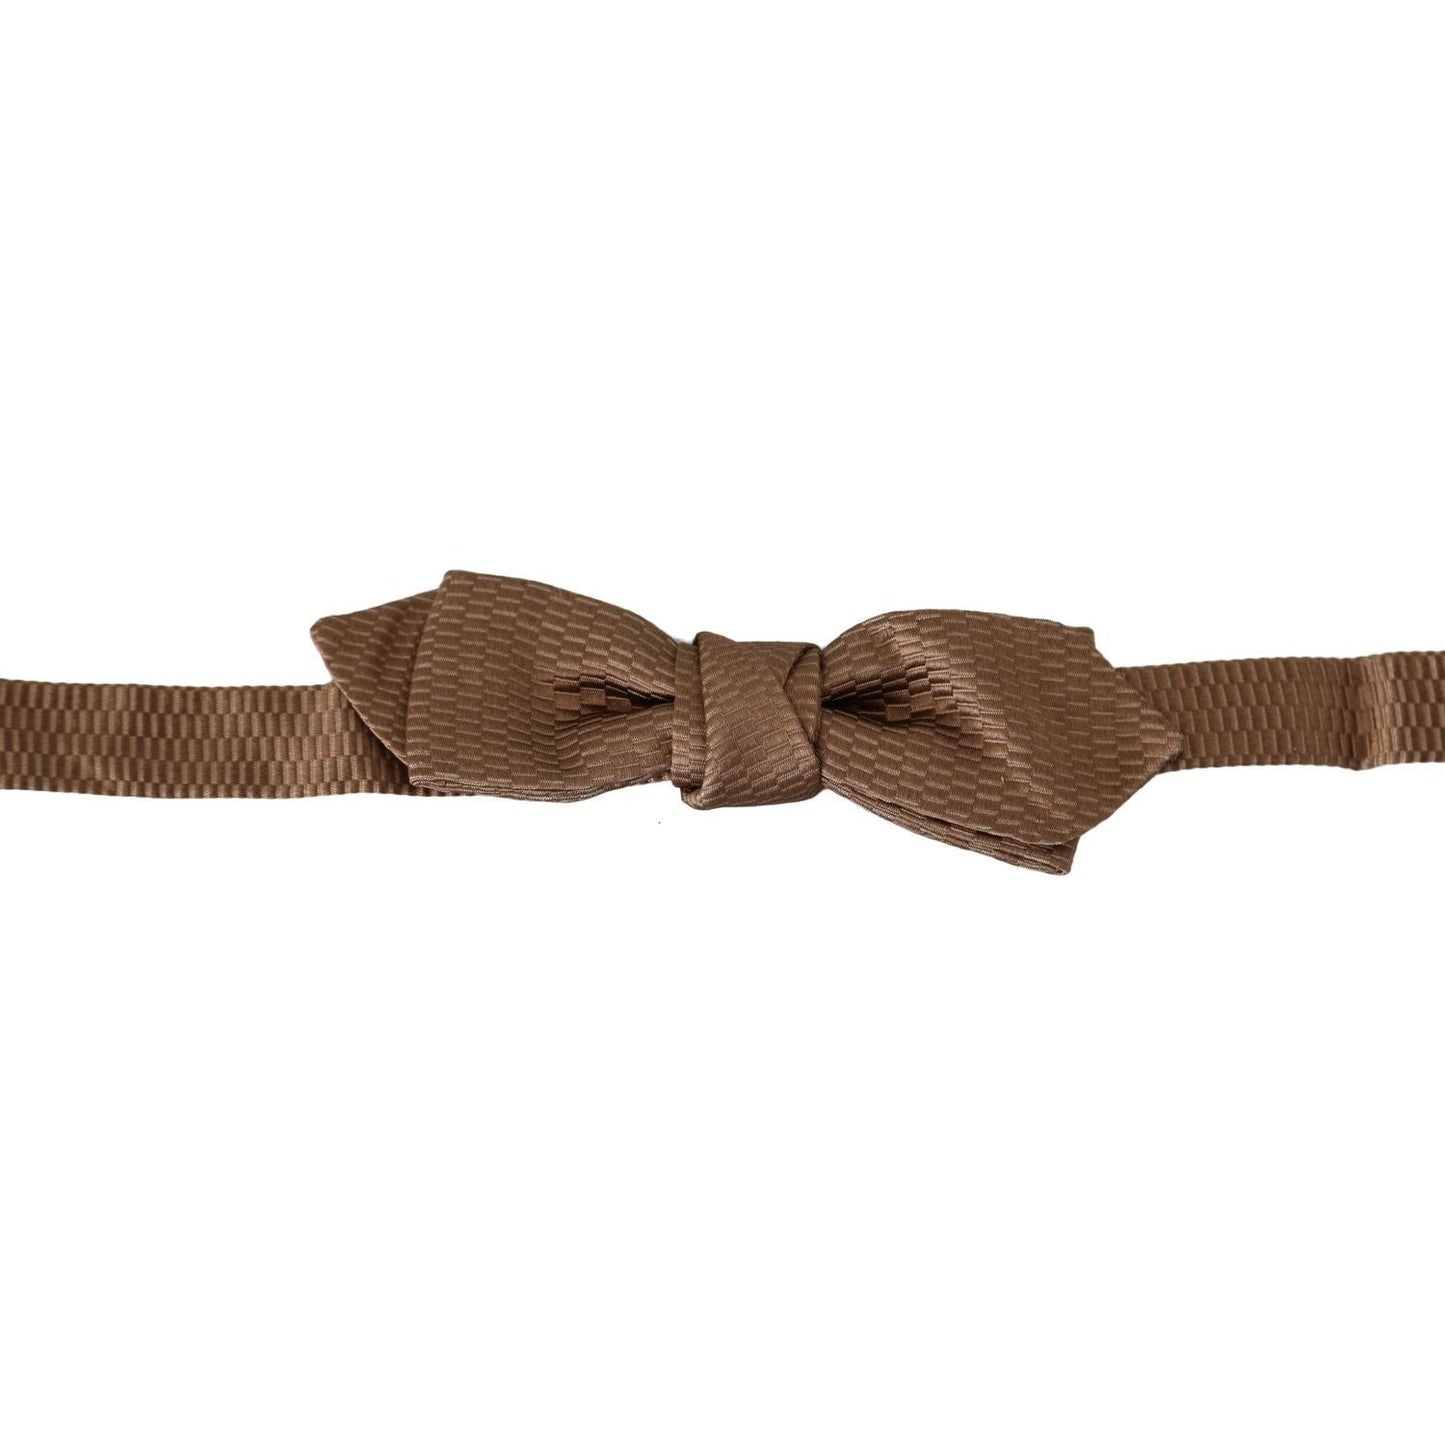 Dolce & Gabbana Elegant Brown Gold Bow Tie men-brown-gold-adjustable-neck-papillon-bow-tie Bow Tie IMG_4271-scaled-39a42c36-9bf.jpg